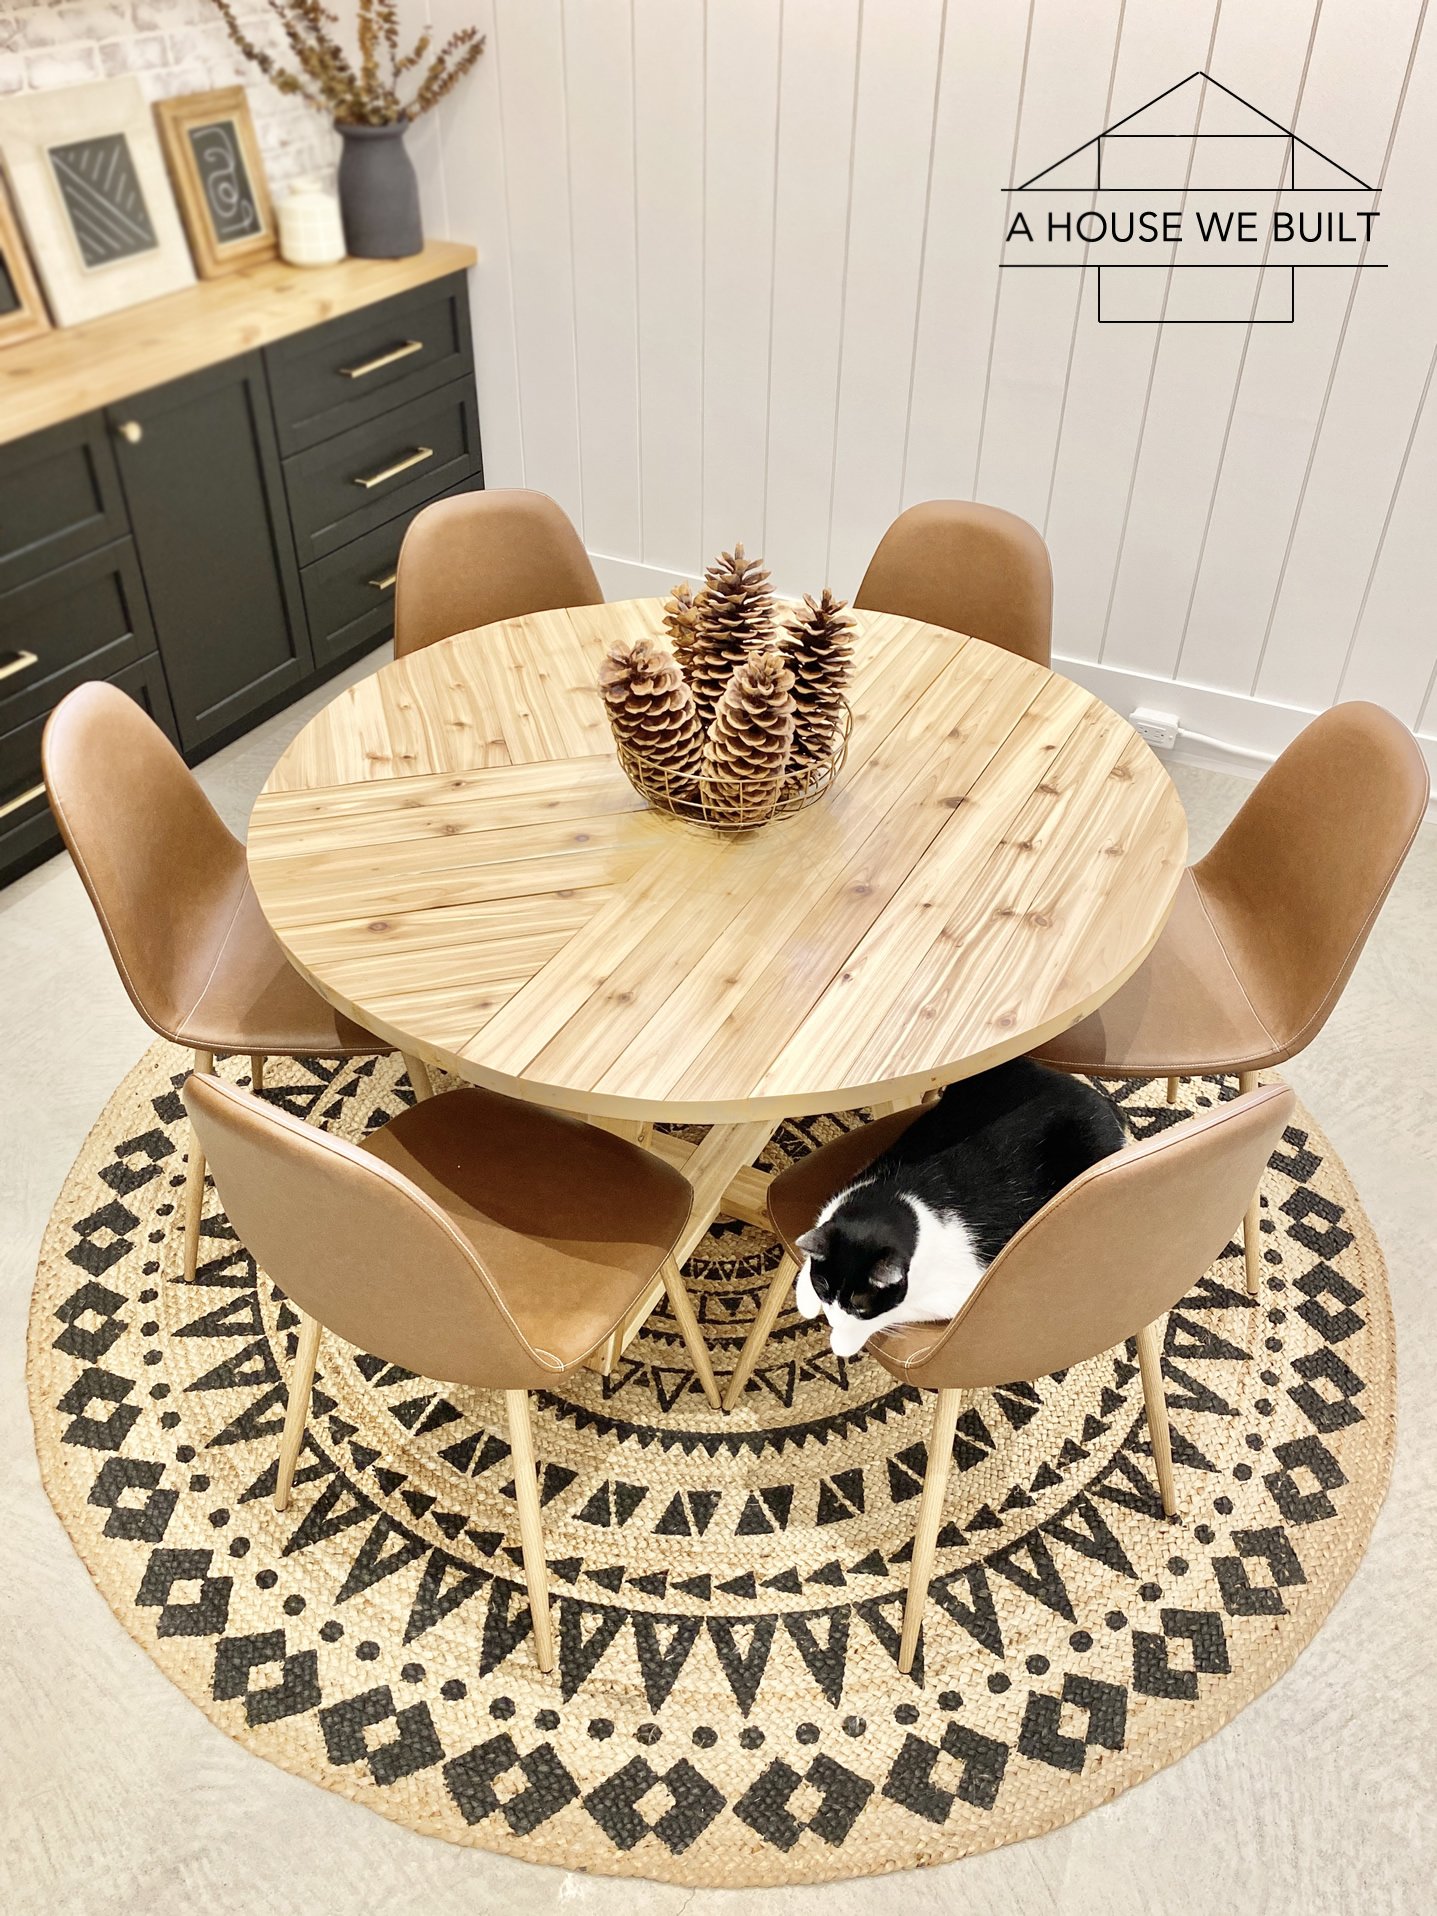 How To Build A Round Table, Diy Round Dining Table With Leaf